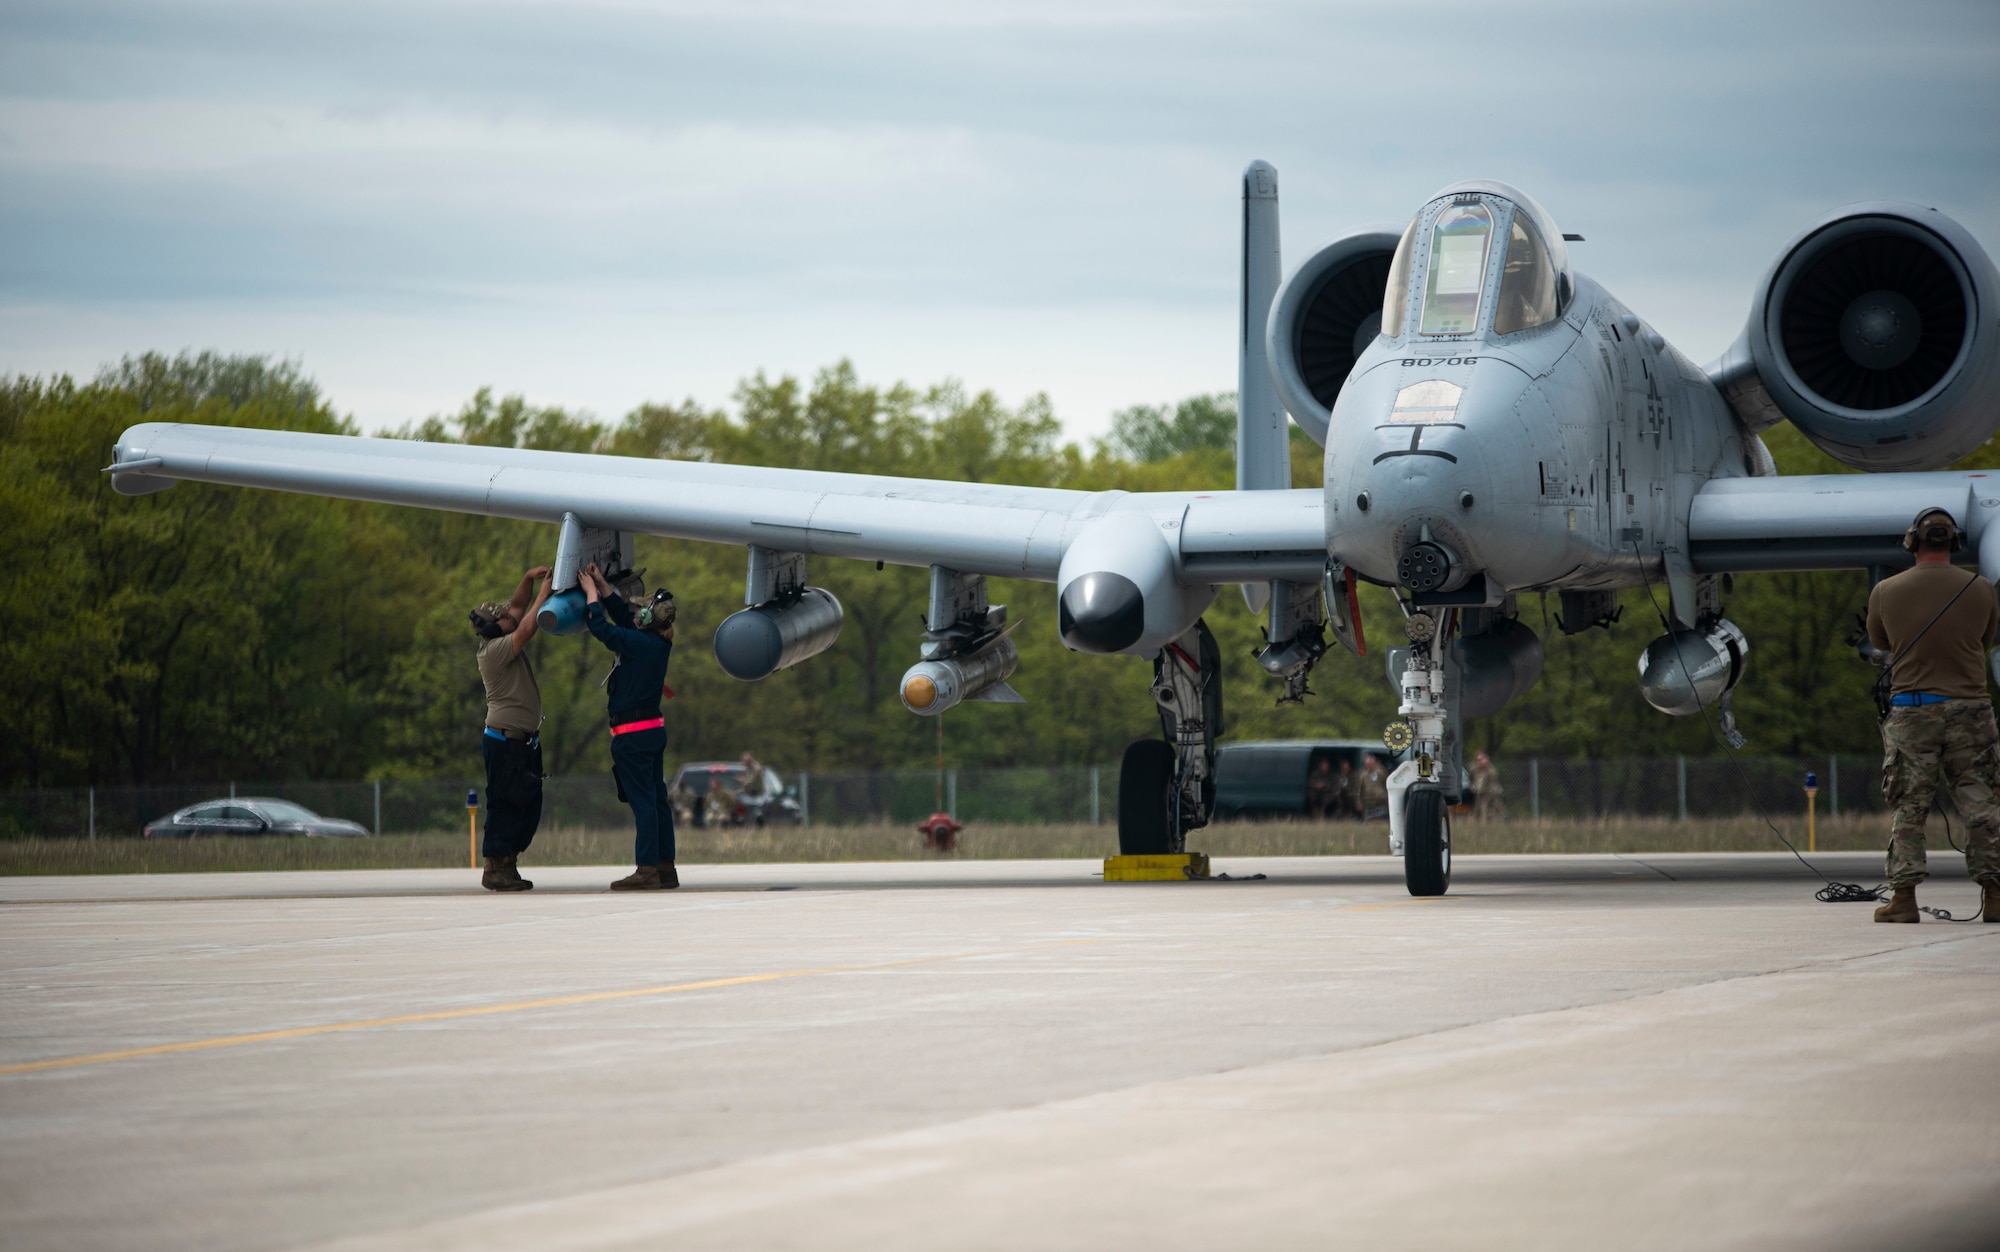 An A-10 Thunderbolt II is equipped with ordinance during Exercise Mobility Guardian at Alpena Combat Readiness Training Center, Michigan, May 25, 2021. Mobility Guardian is a training exercise designed to prepare Airmen to face real-world security challenges and sustain strategic deterrence anywhere in the world. (U.S. Air Force photo by Airman 1st Class Matthew Porter)